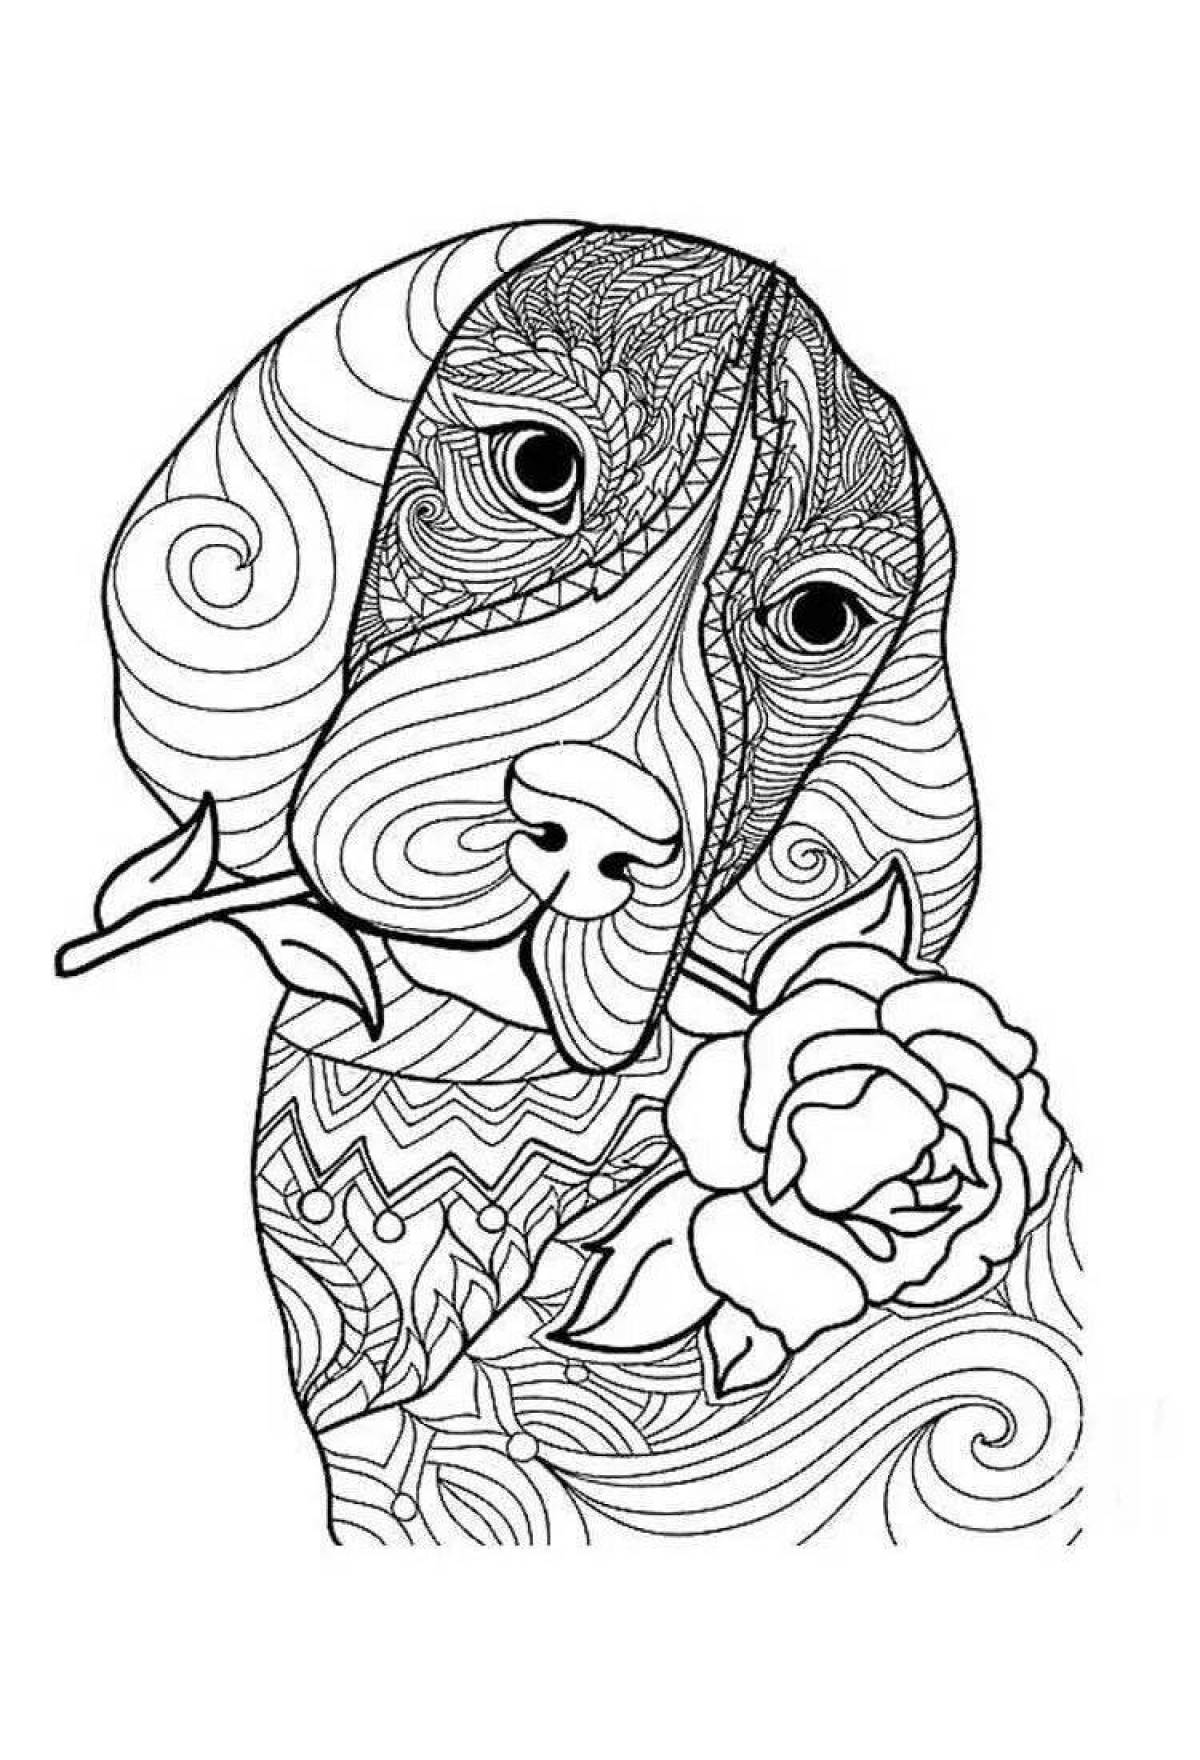 Adorable animal coloring page